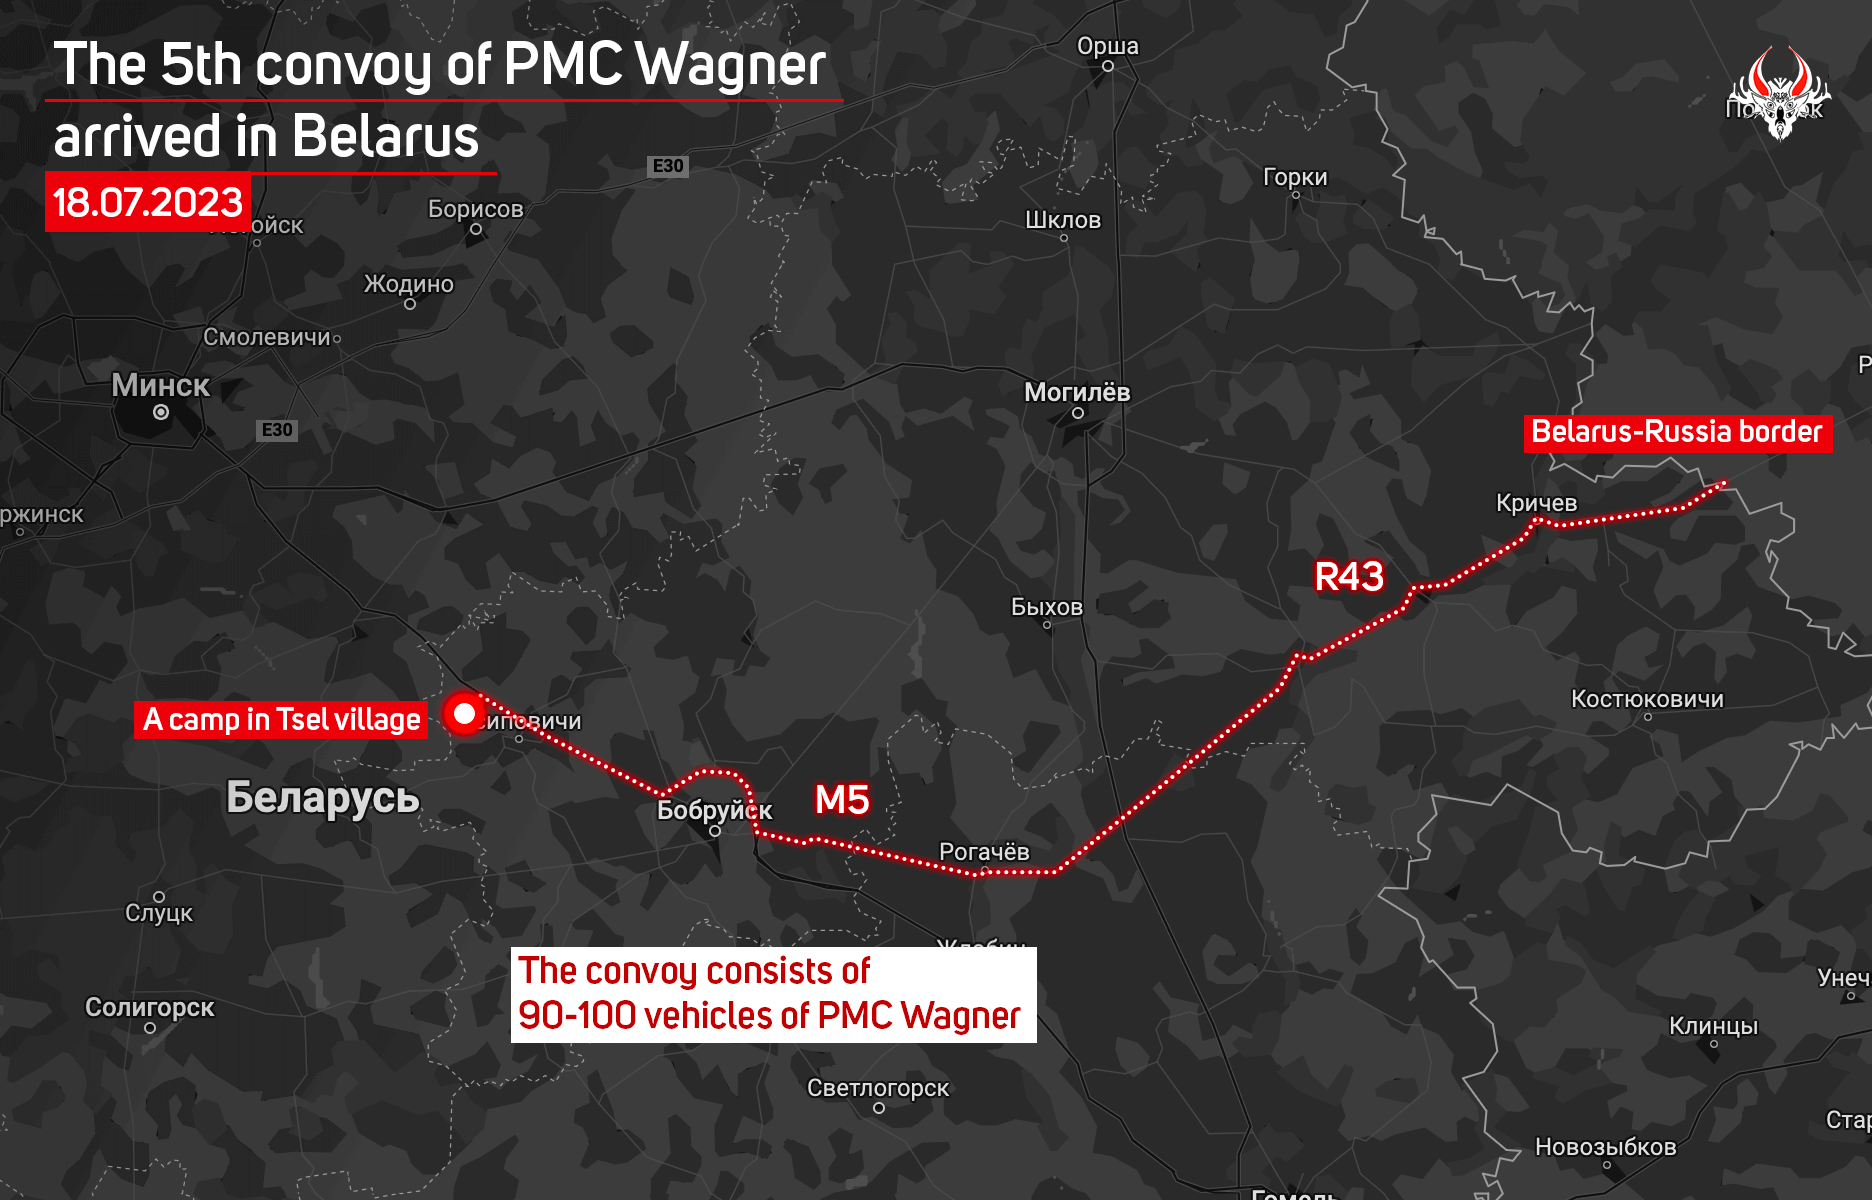 The 5th convoy of PMC Wagner arrived in Belarus: it includes over 90 vehicles